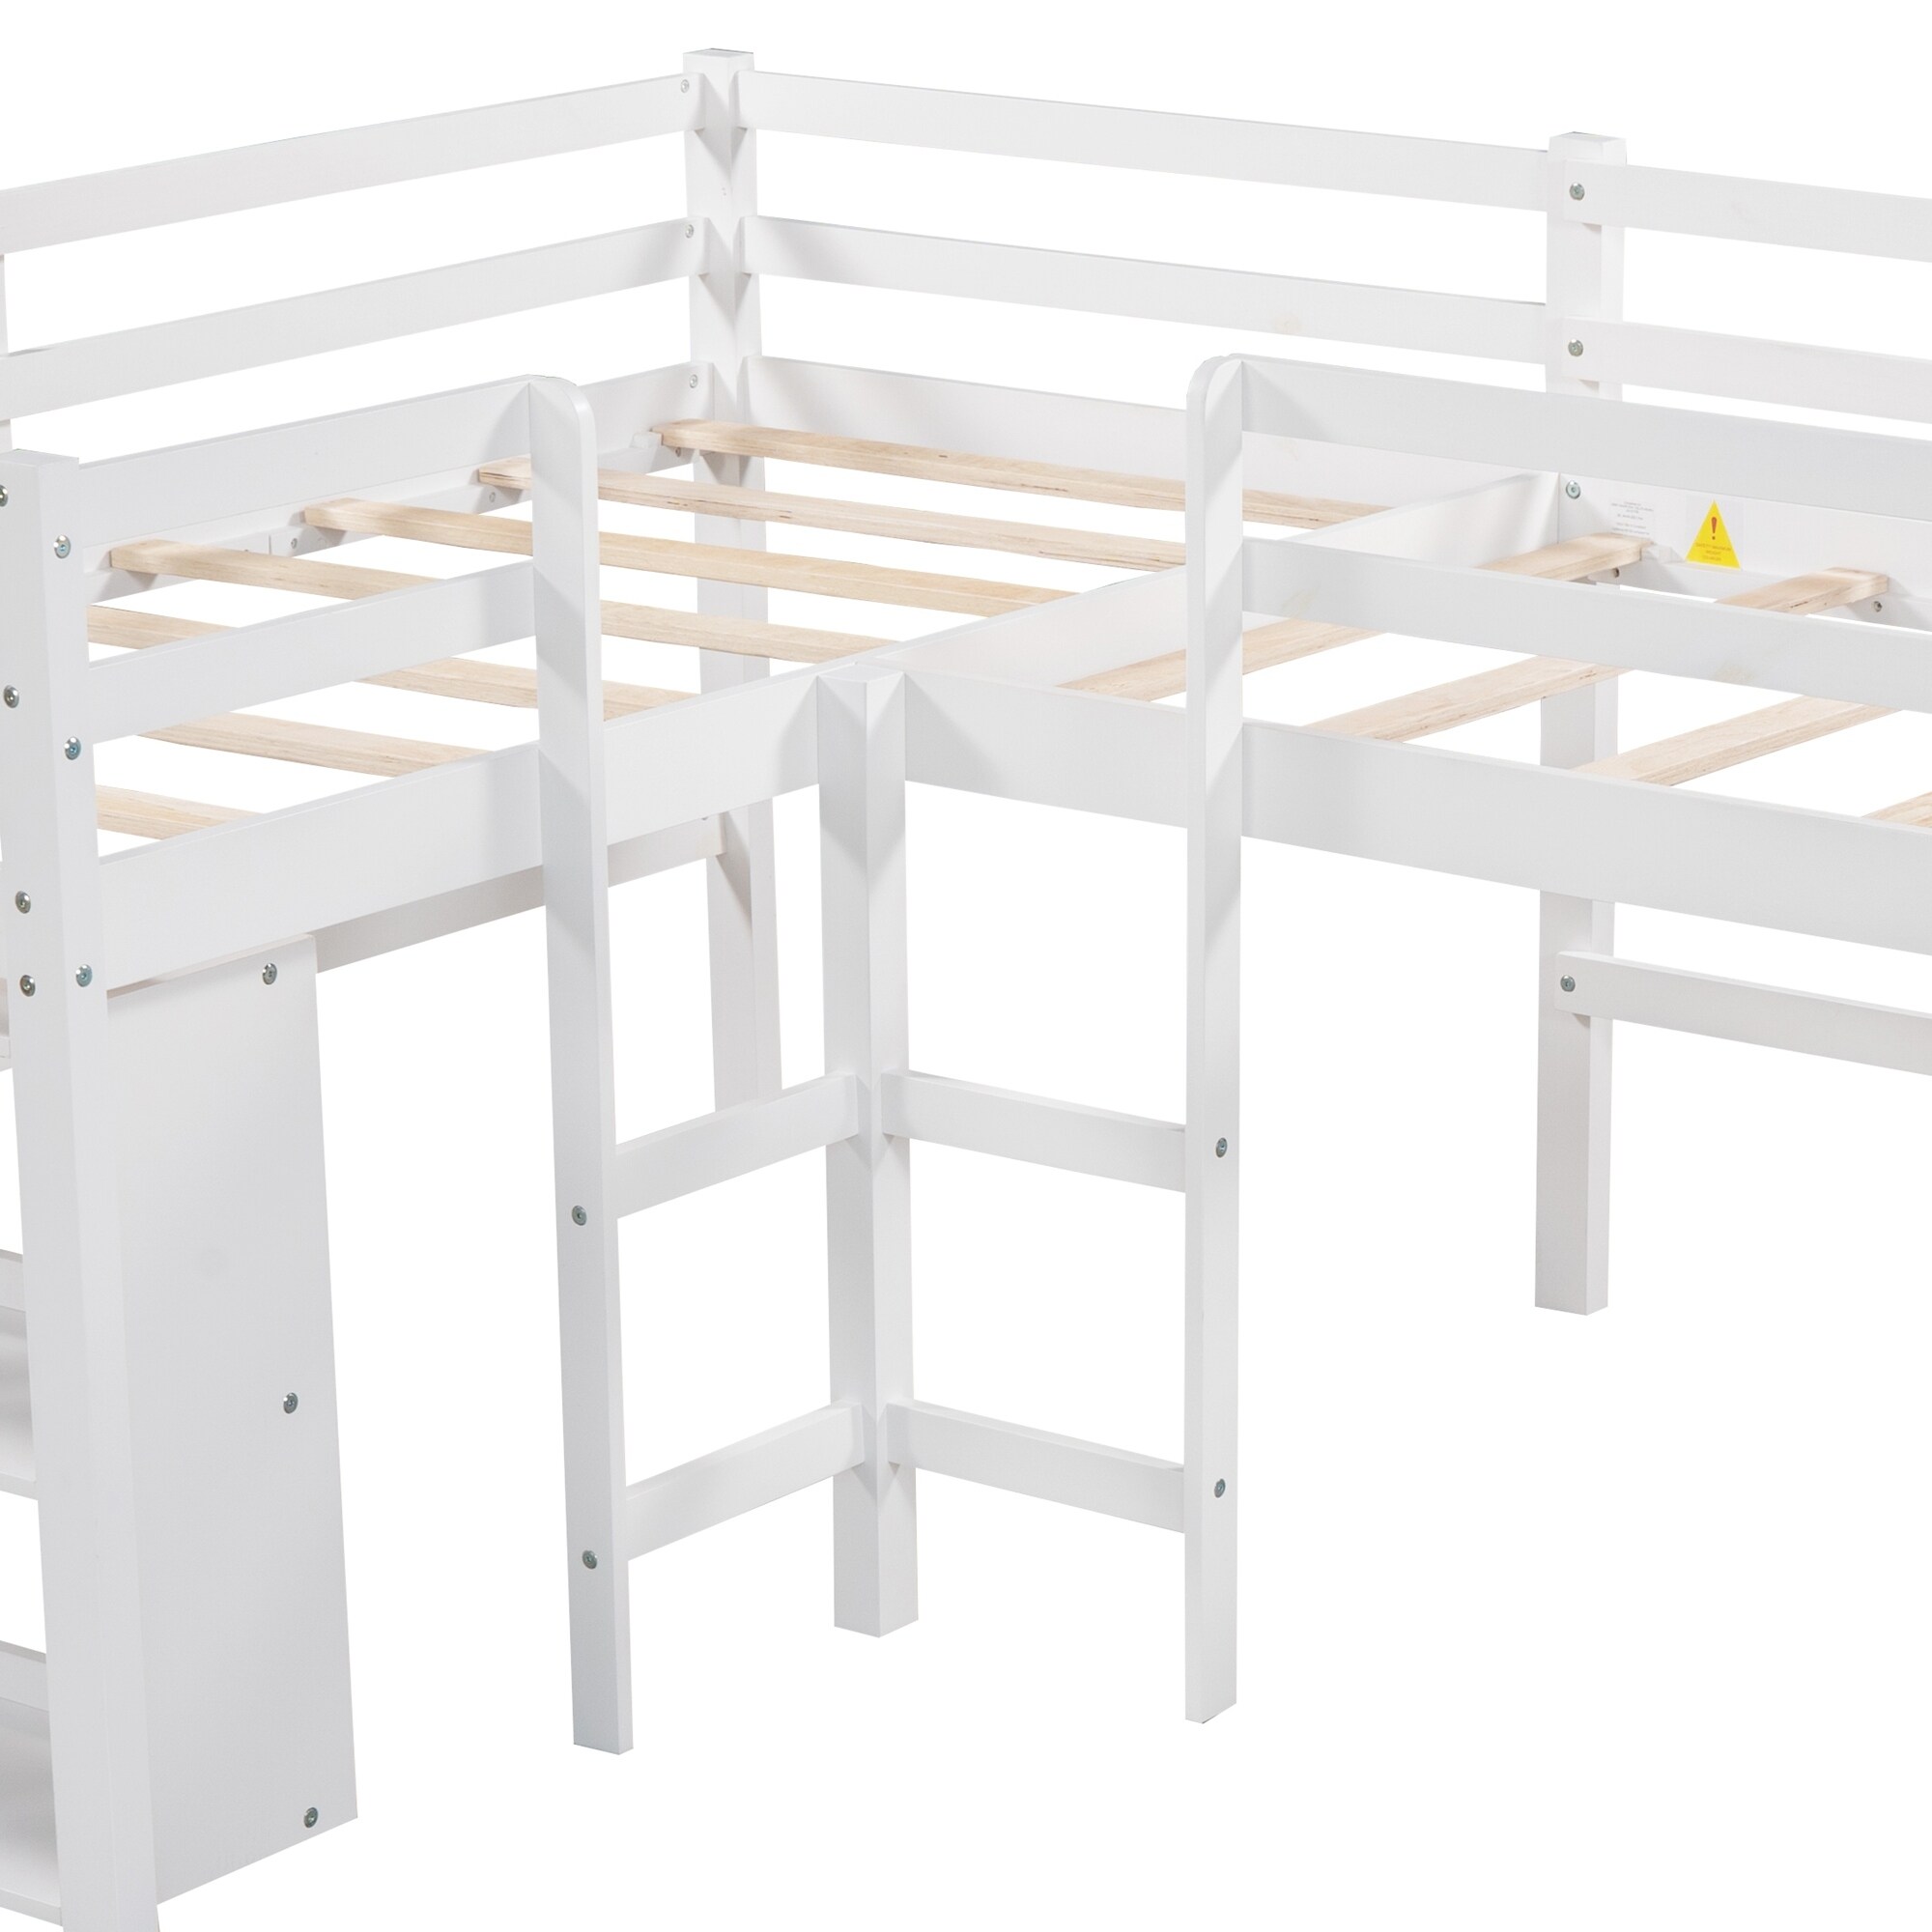 L-Shaped Twin Size Loft Bed with Movable Storage Shelves and Slide, for Children's Rooms (2 Beds)